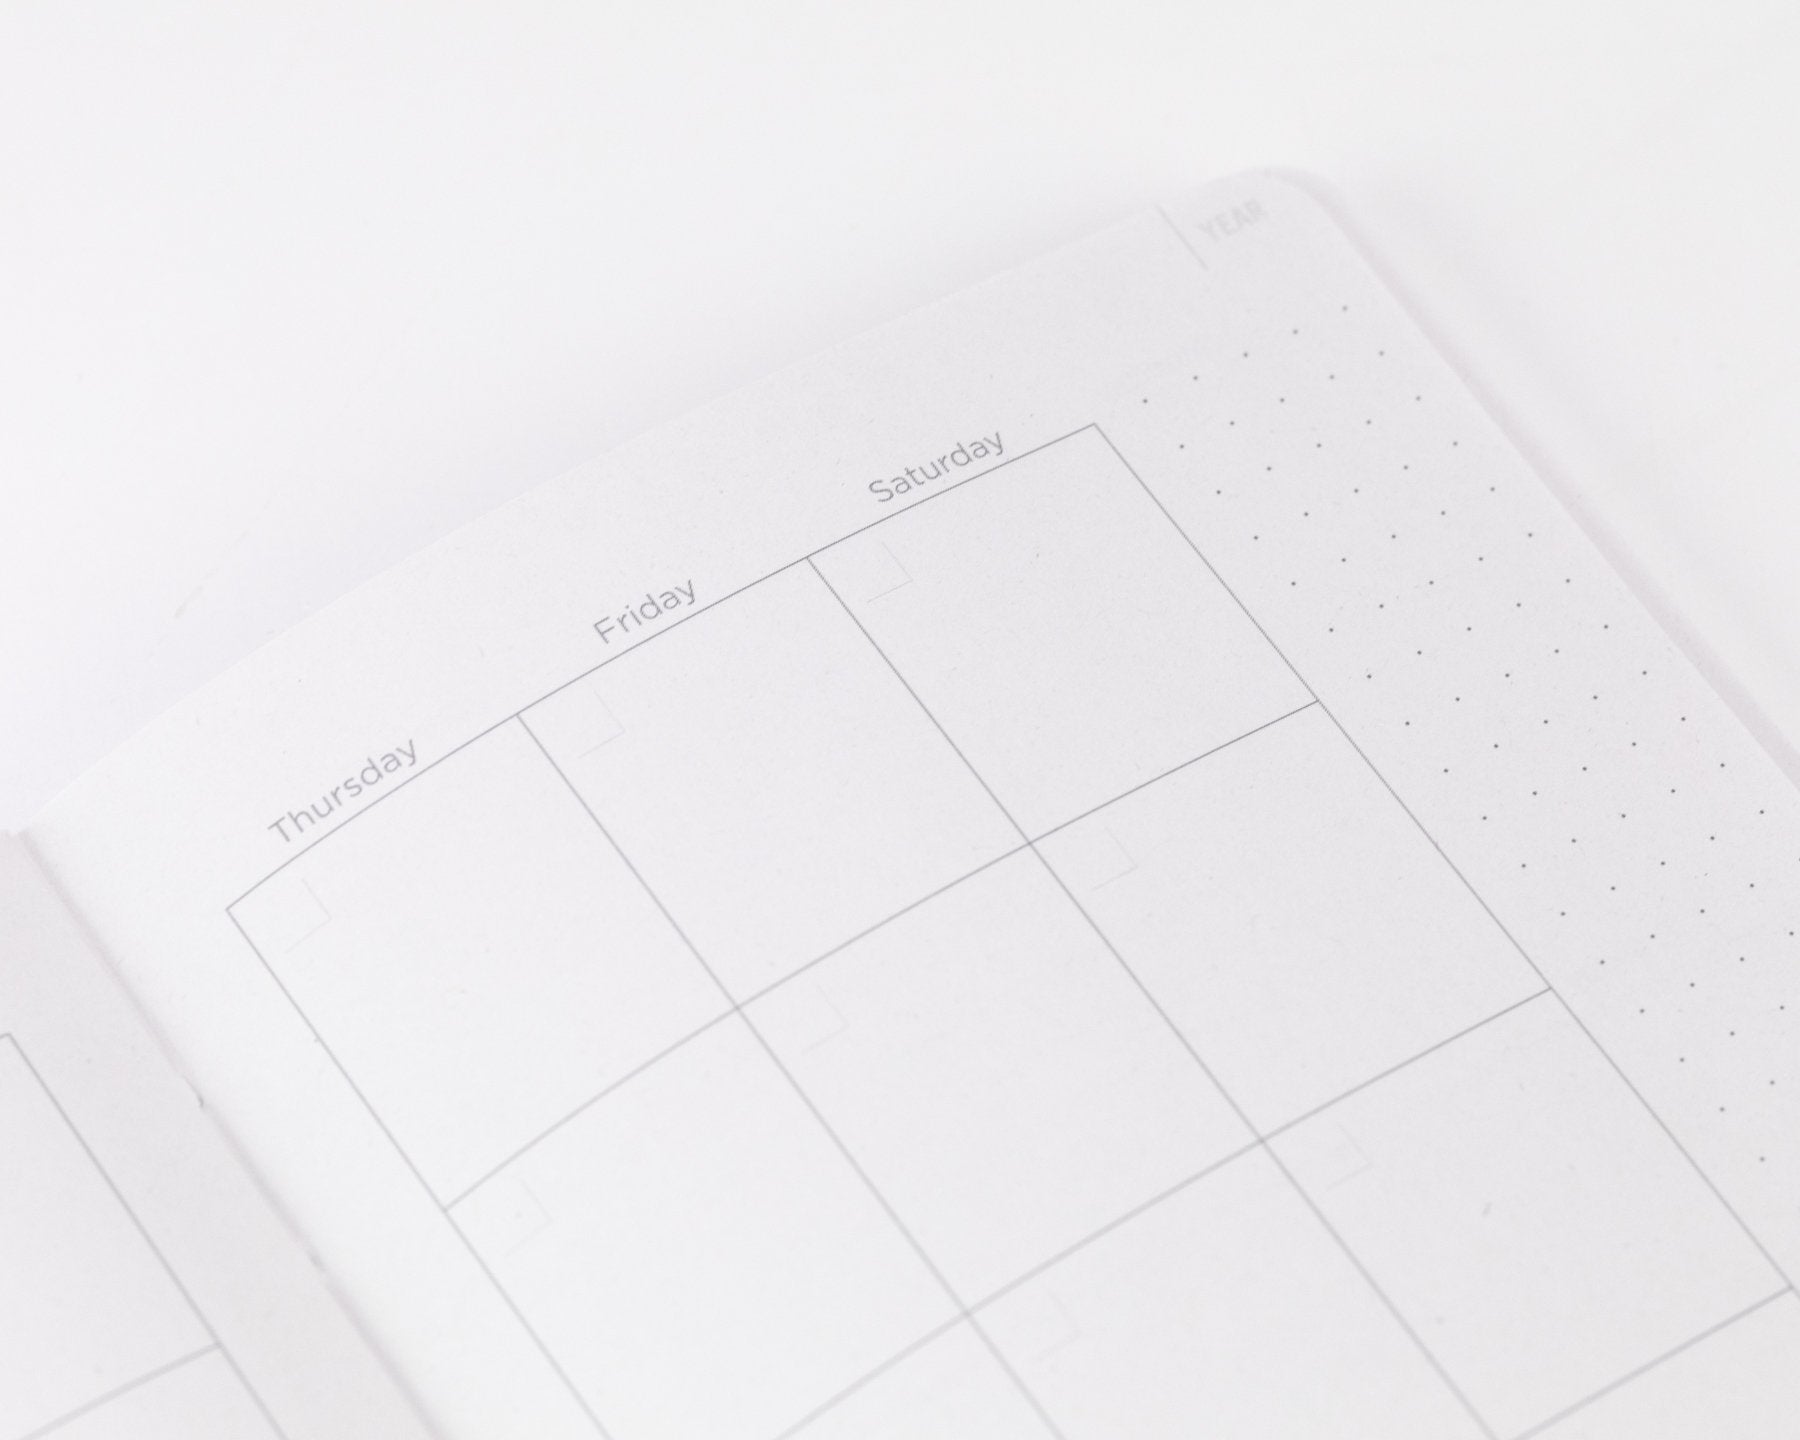 Neural Circuit Yearly Planner